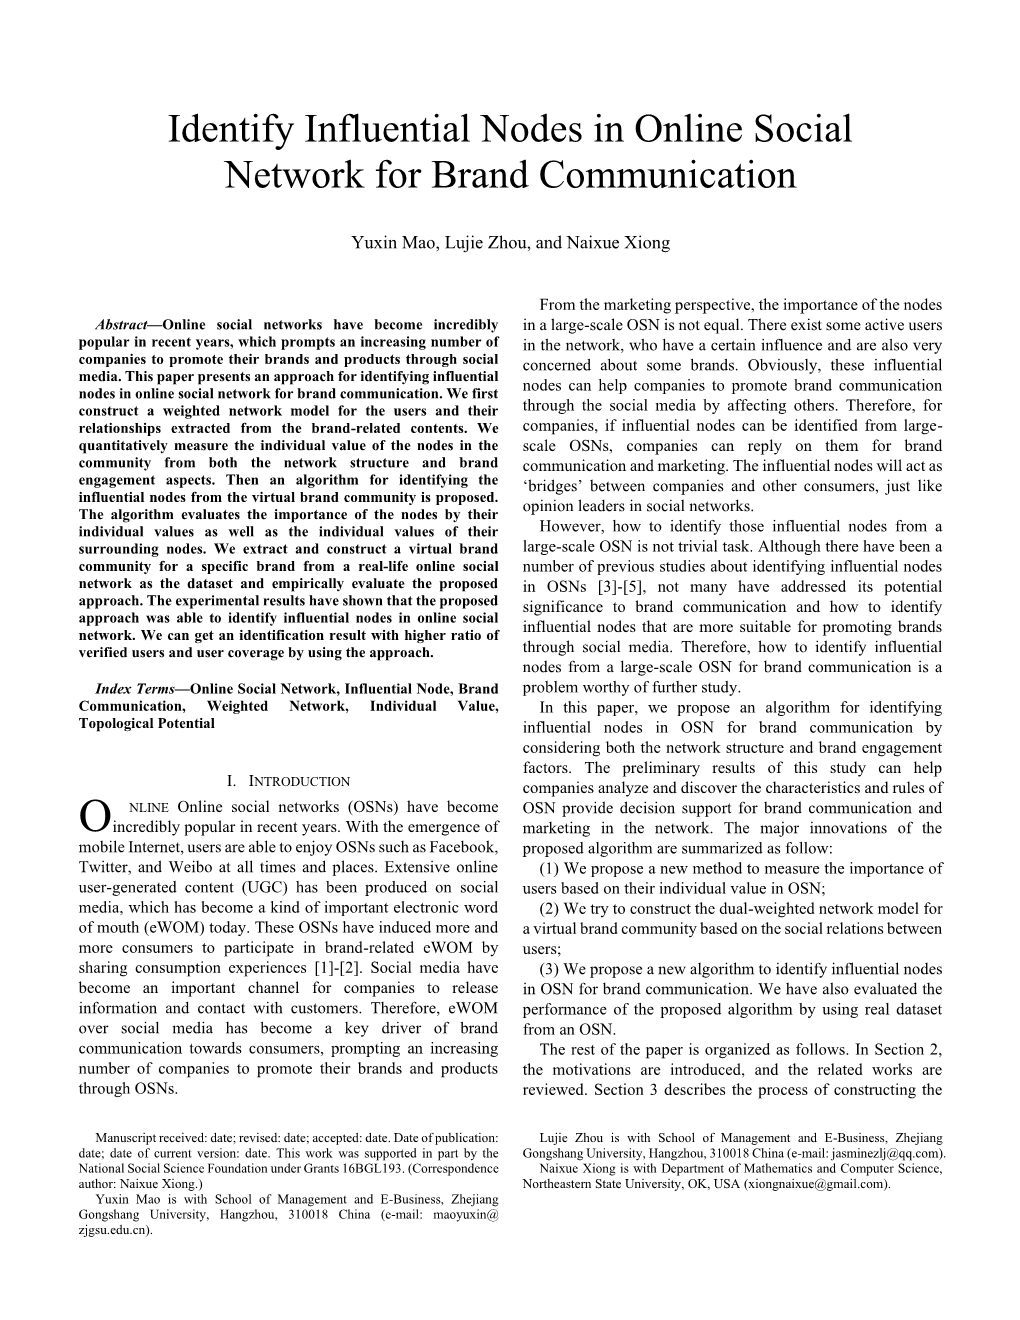 Identify Influential Nodes in Online Social Network for Brand Communication